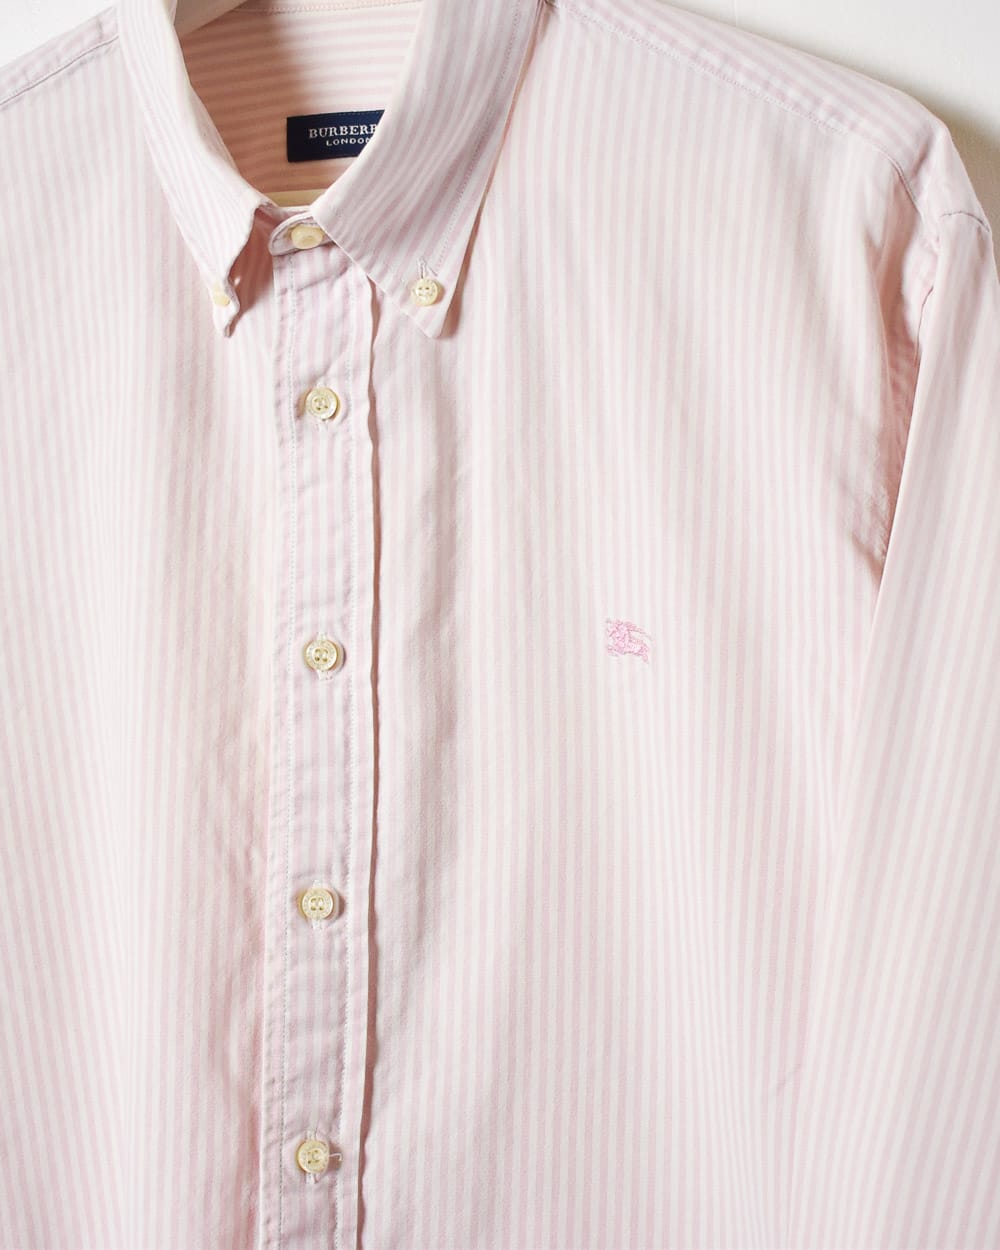 Pink Burberry Striped Shirt - Large